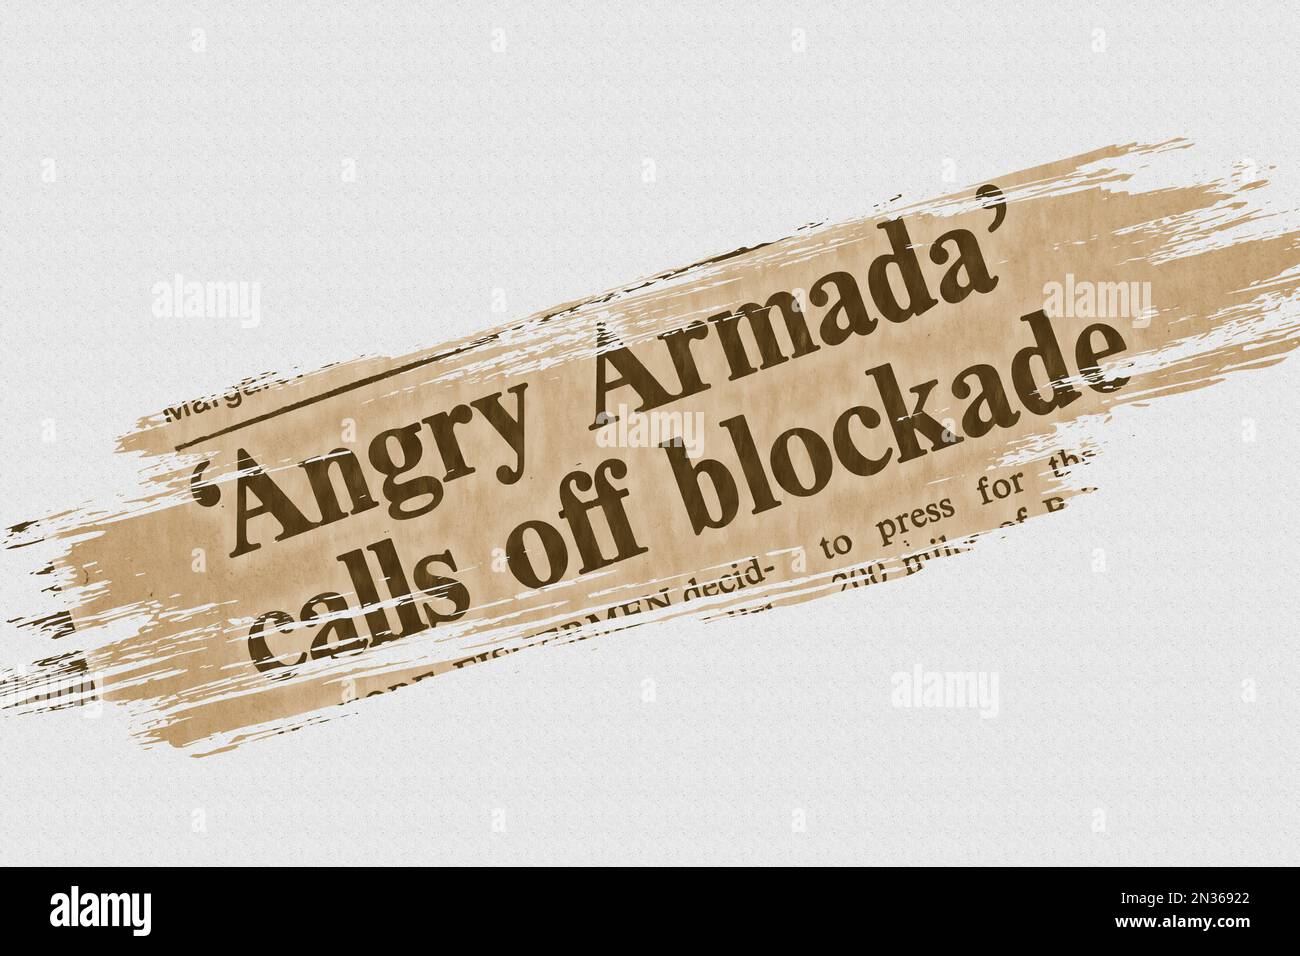 Angry Armada calls off blockade - news story from 1975 newspaper headline article title highlighted Stock Photo